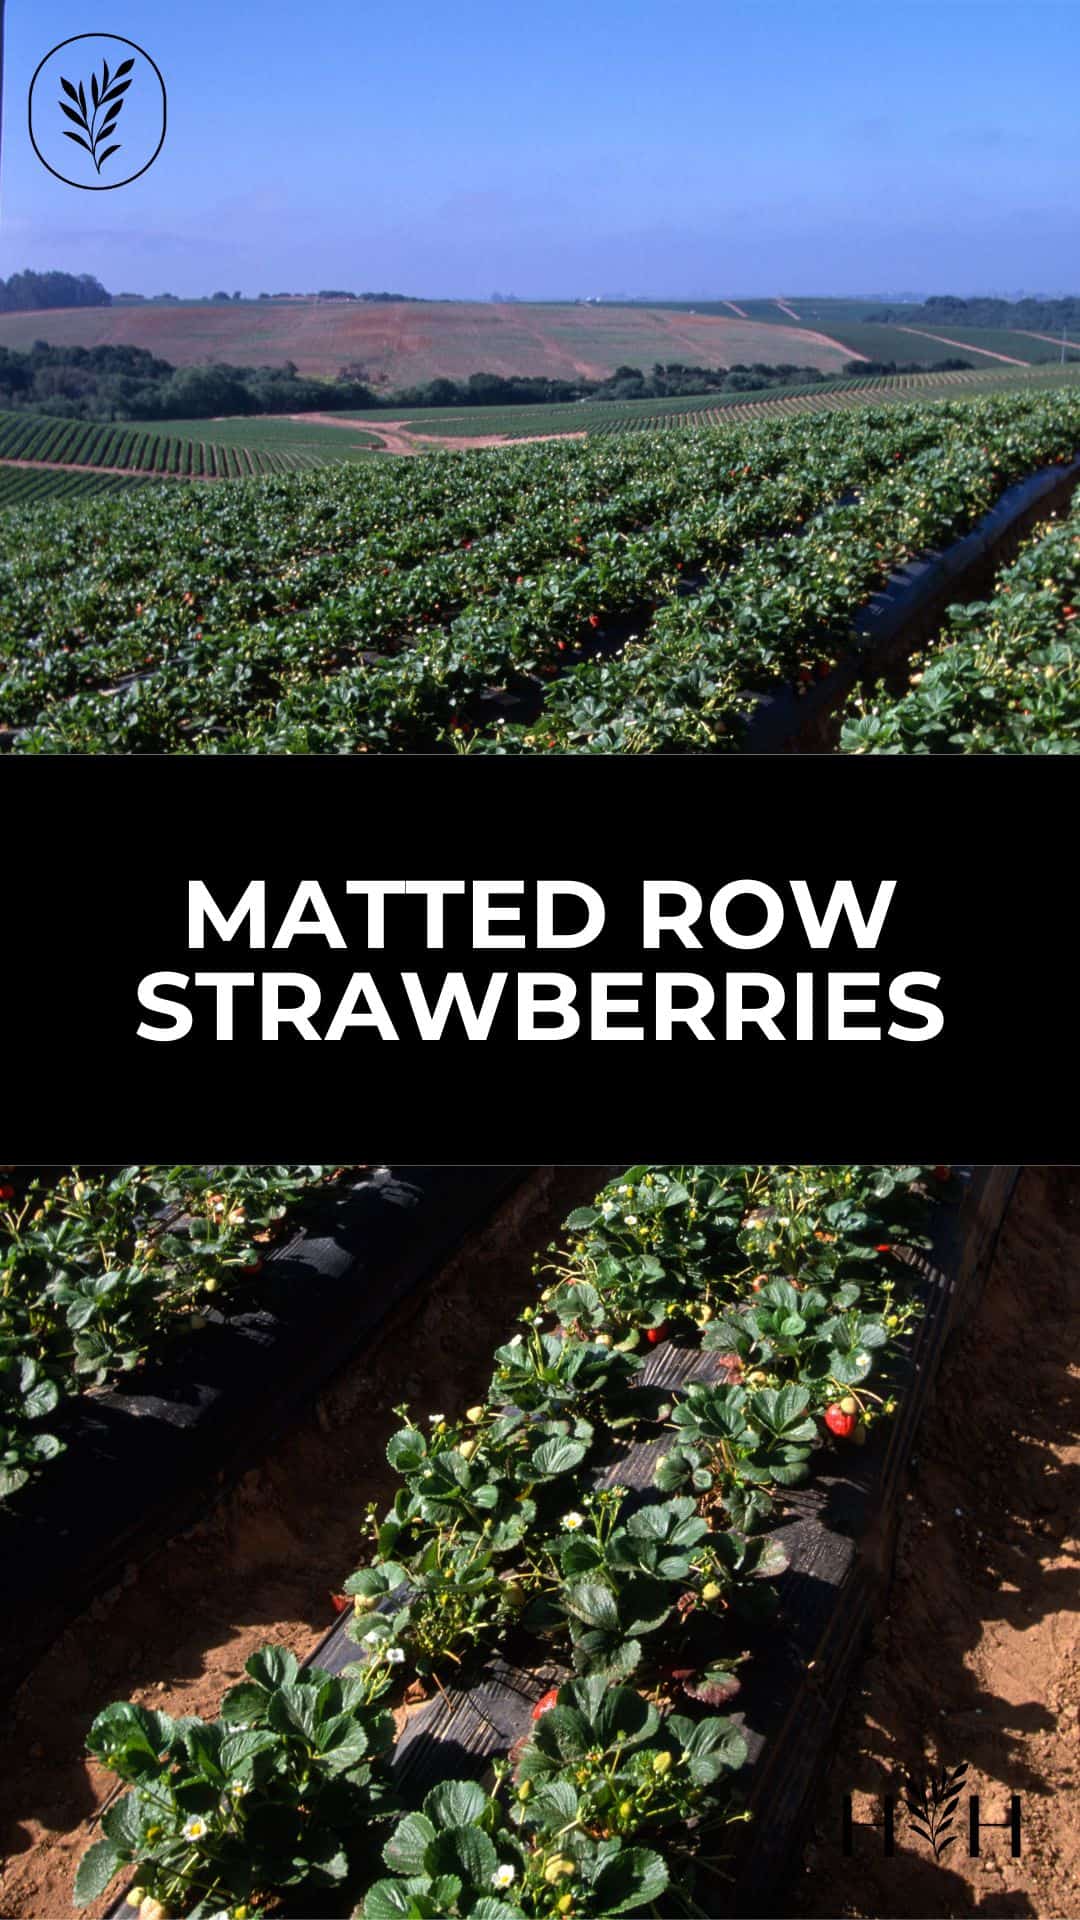 Matted row strawberries via @home4theharvest